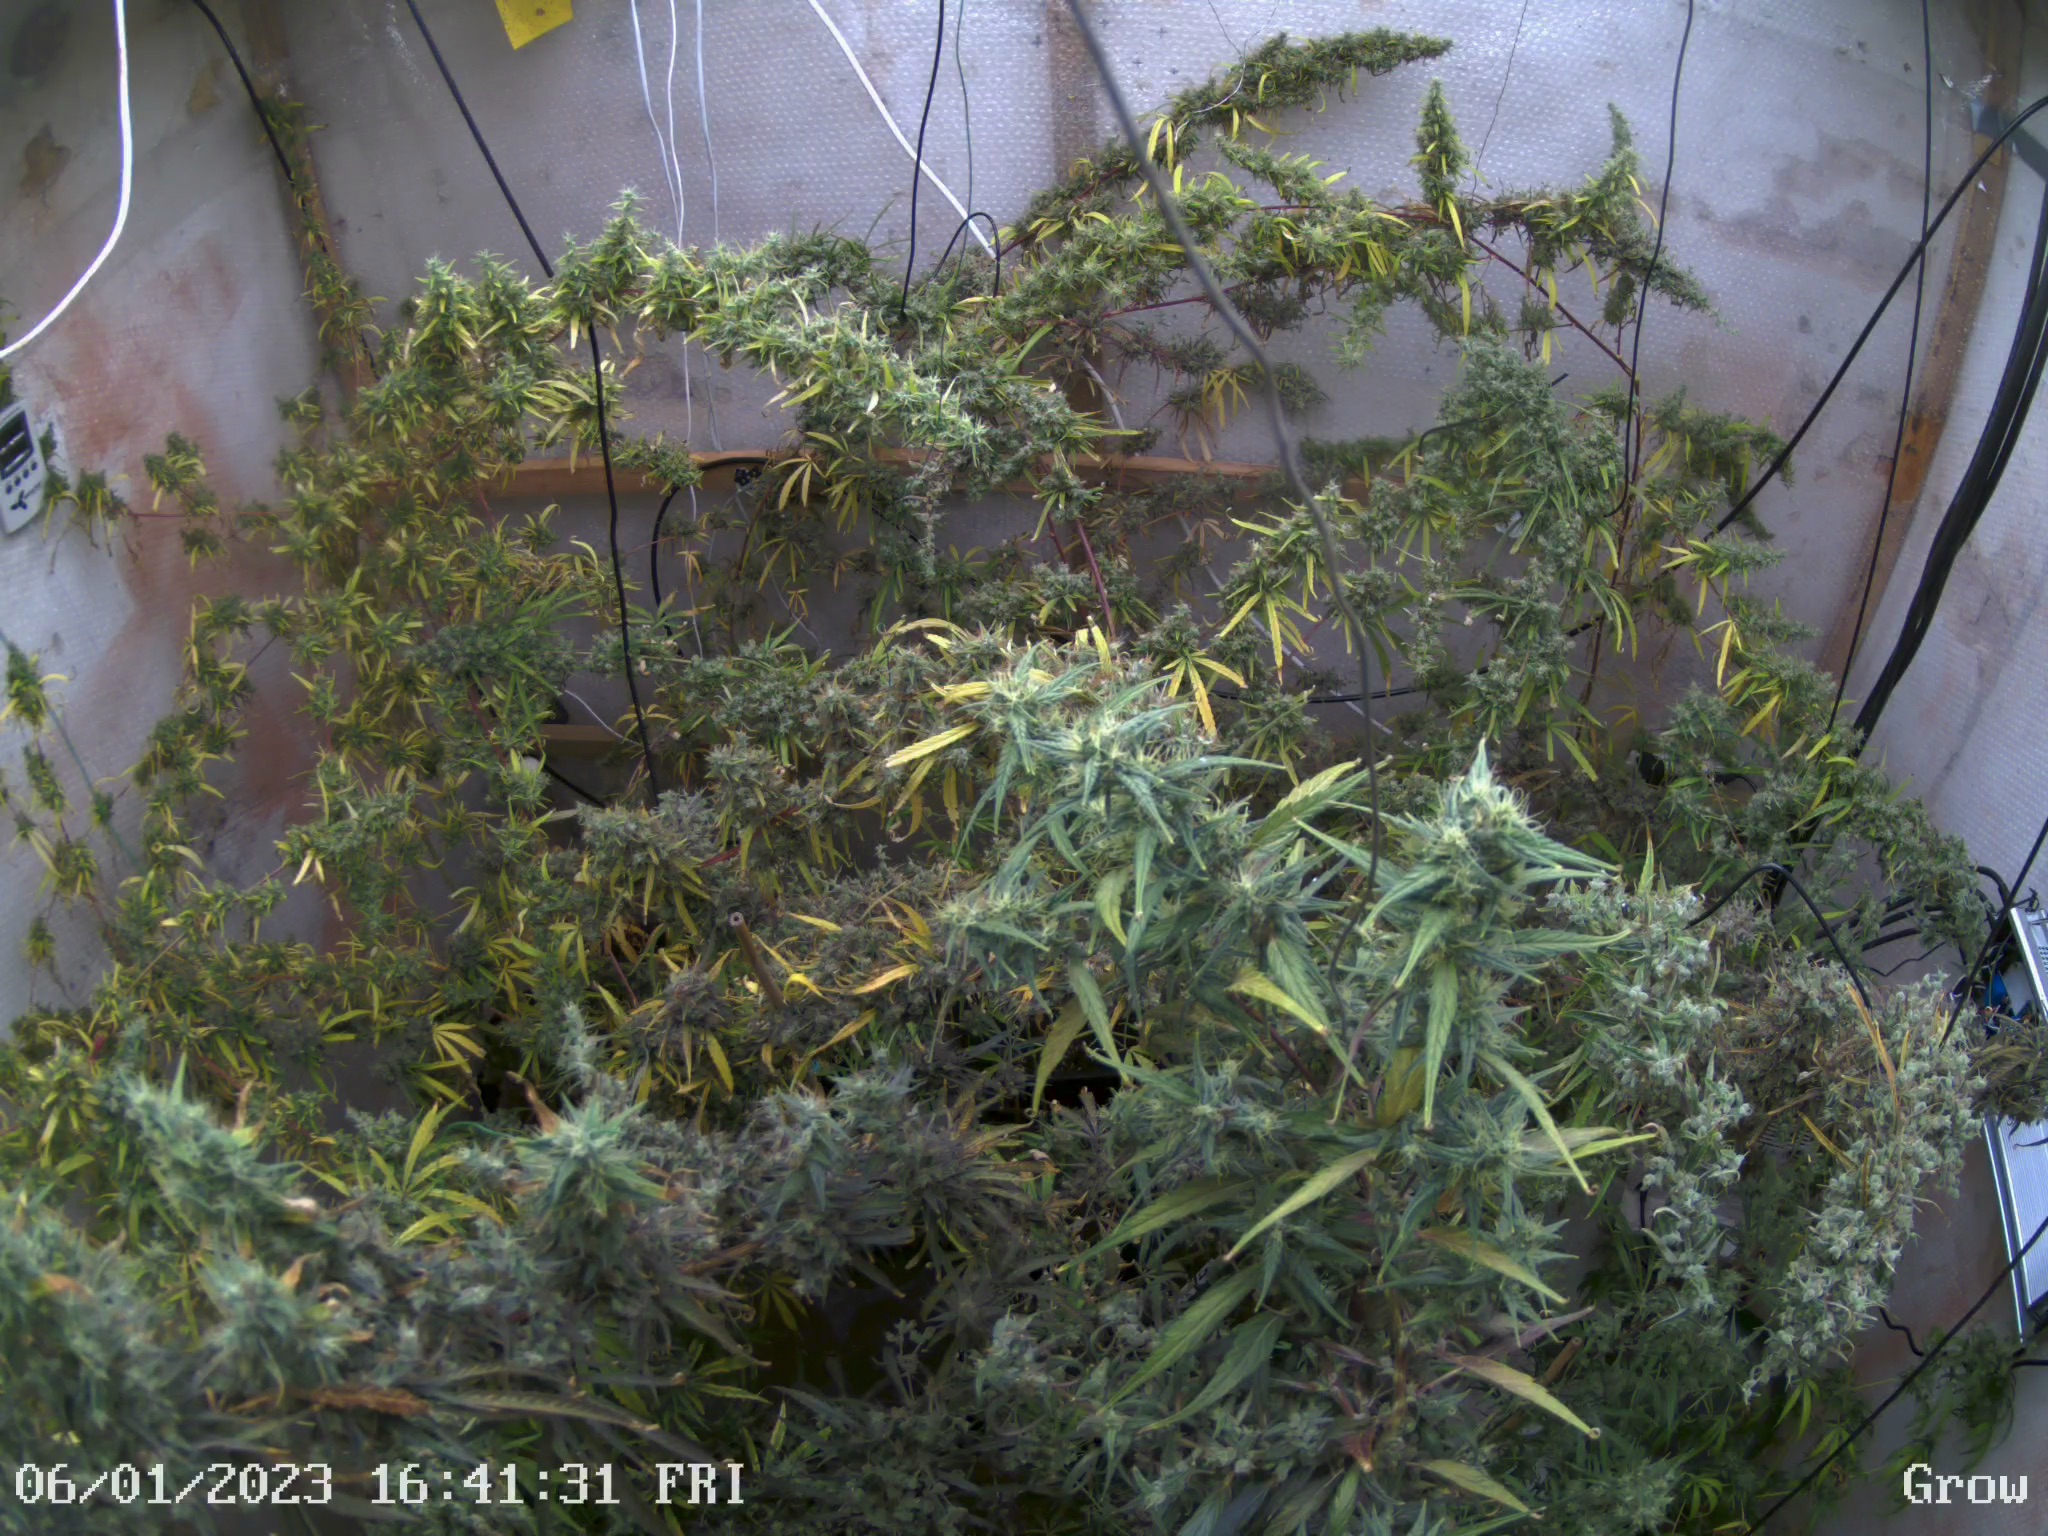 Grow CH01 at Friday, 6. January 2023 at 16:41:45 Central European Standard Time.jpeg